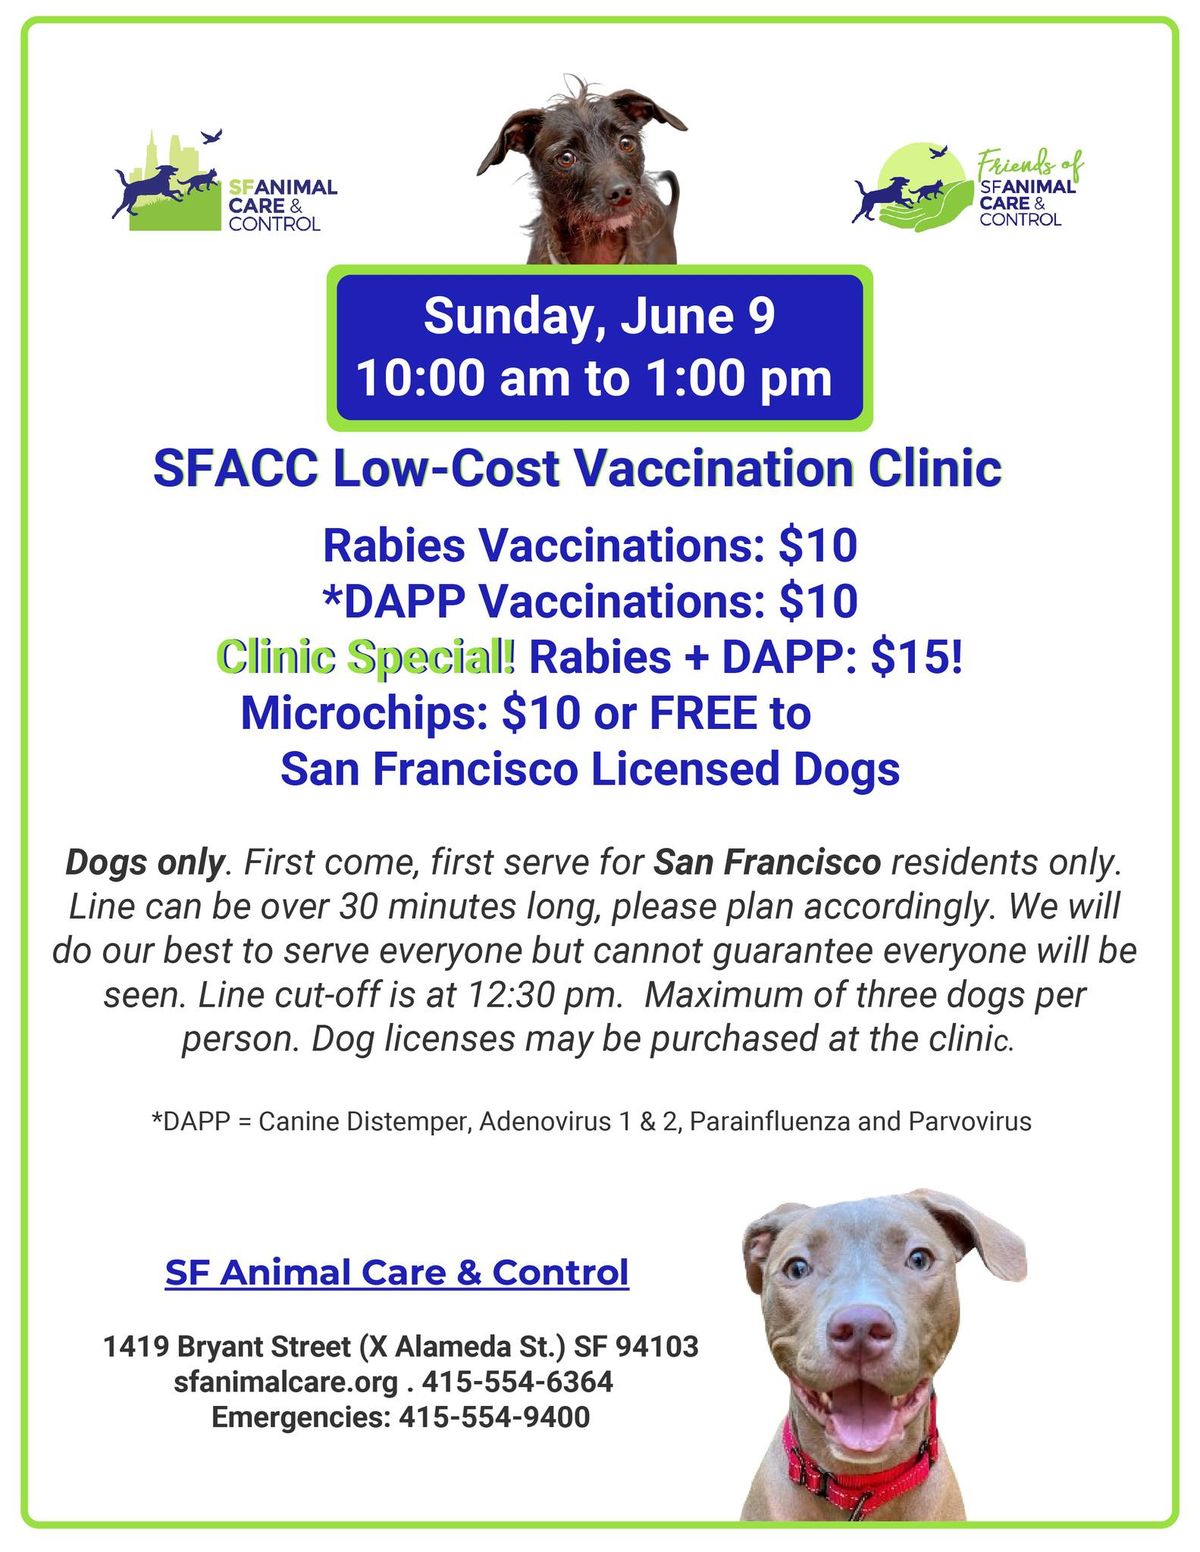 Low-Cost Vaccination and Microchip Clinic for Dogs